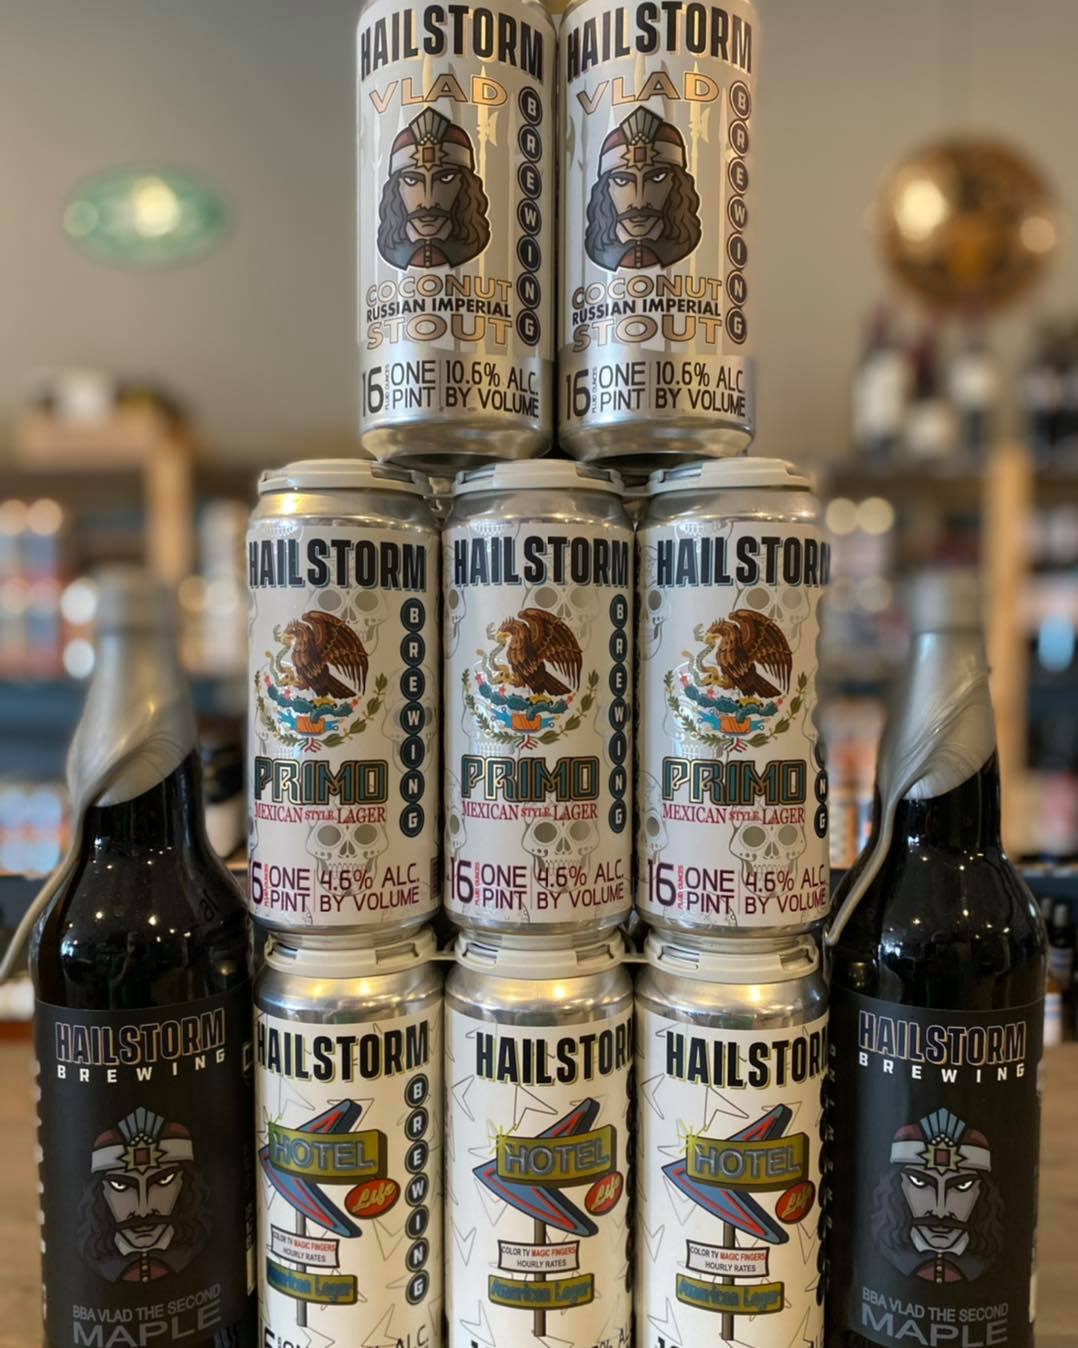 Beers from Hailstorm Brewing